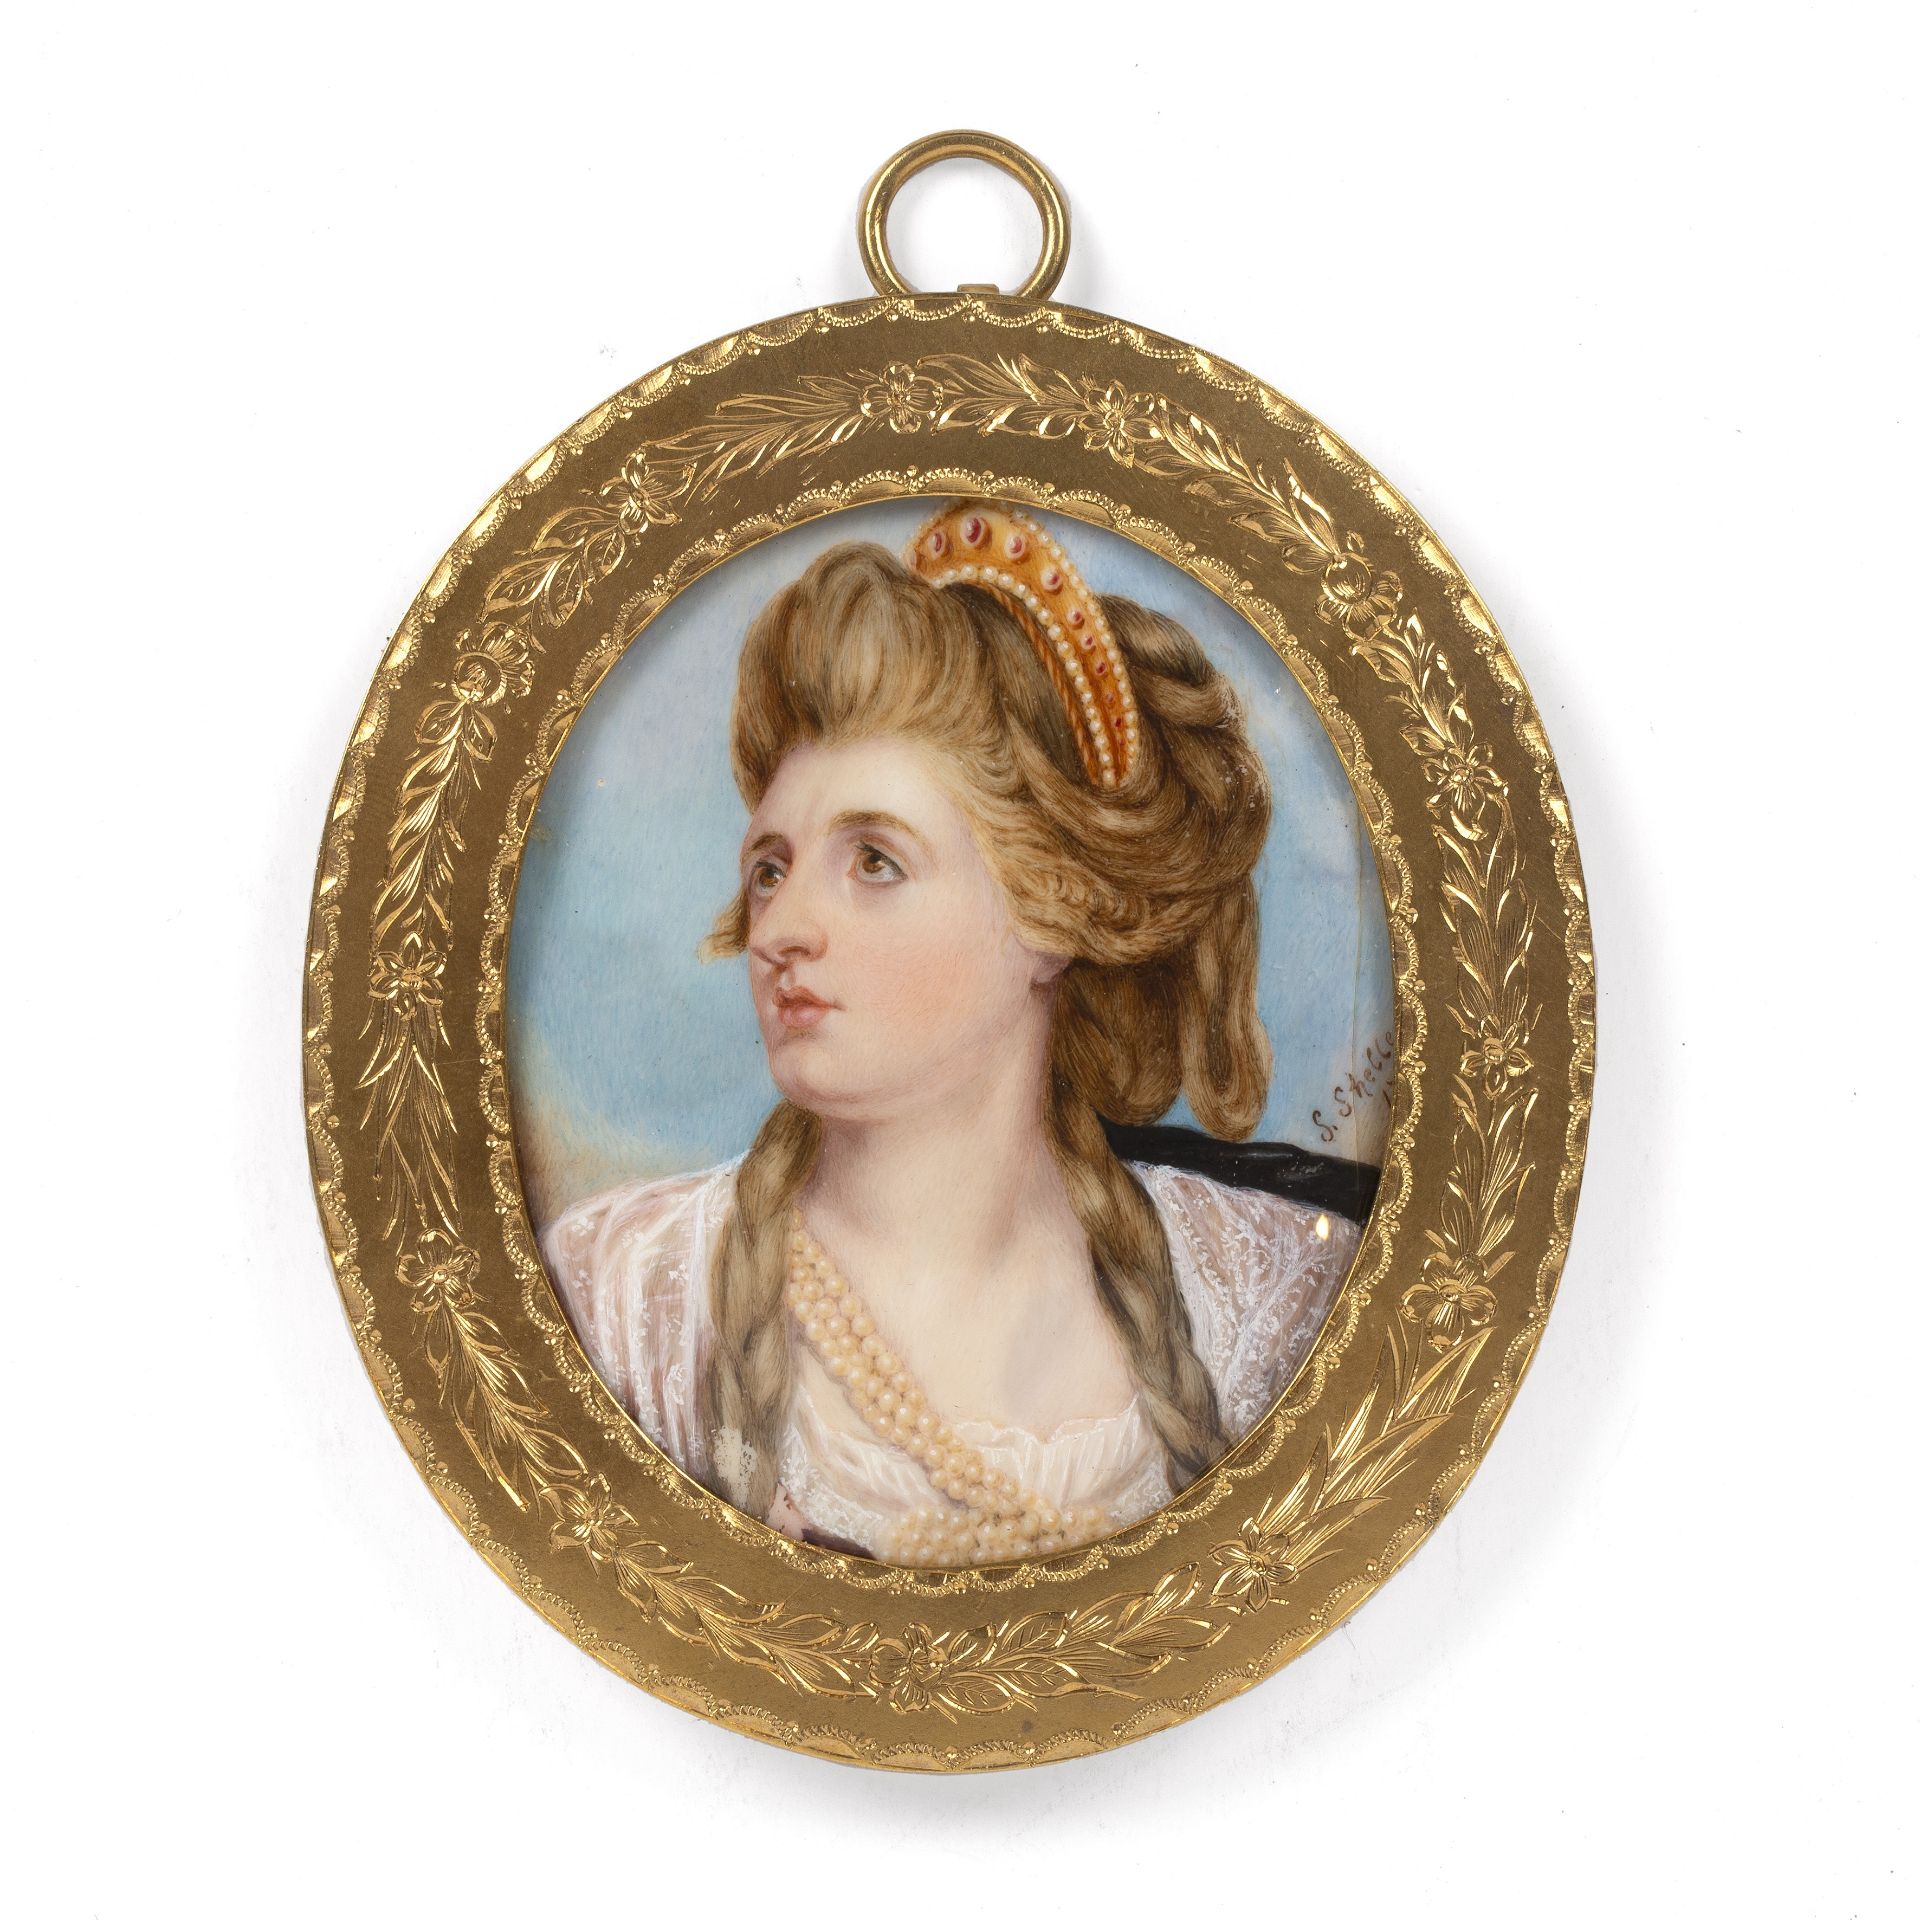 A 19th century English school, miniature oval portrait of Sarah Siddons with plaited hair and